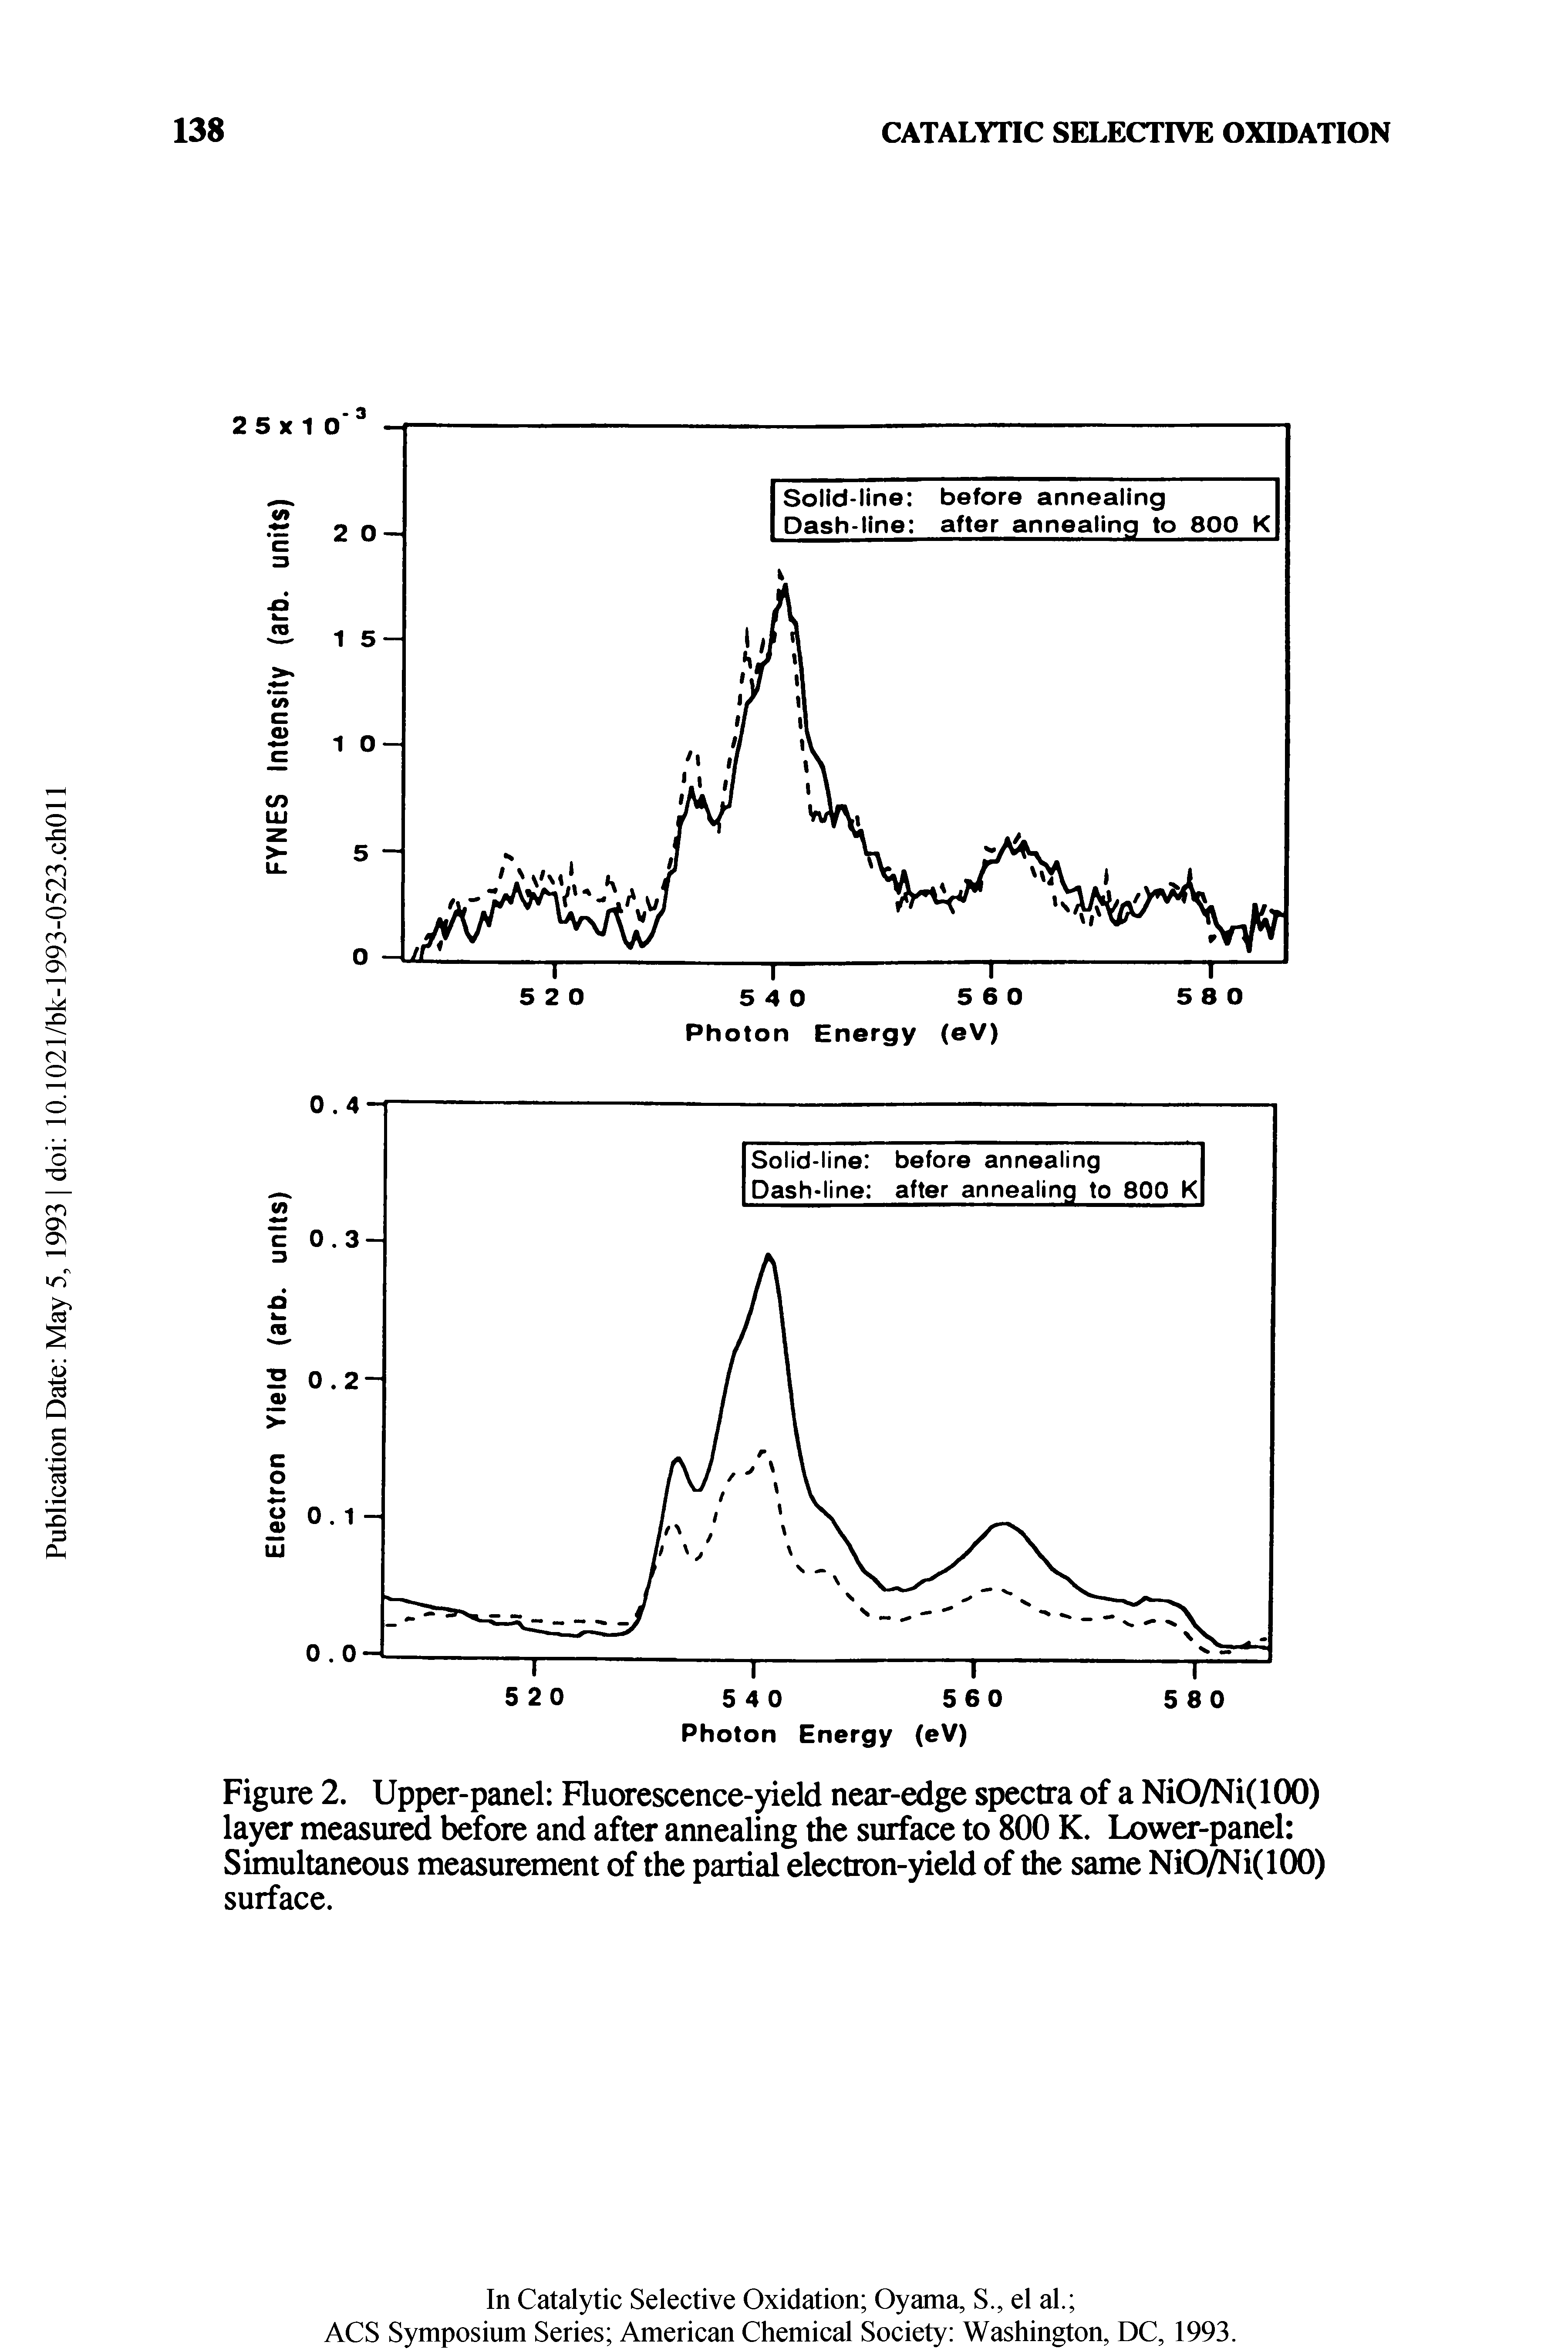 Figure 2. Upper-panel Fluorescence-yield near-edge spectra of a NiO/Ni(100) layer measured before and after annealing the surface to 800 K. Lower-panel Simultaneous measurement of the partial electron-yield of the same NiO/Ni(100) surface.